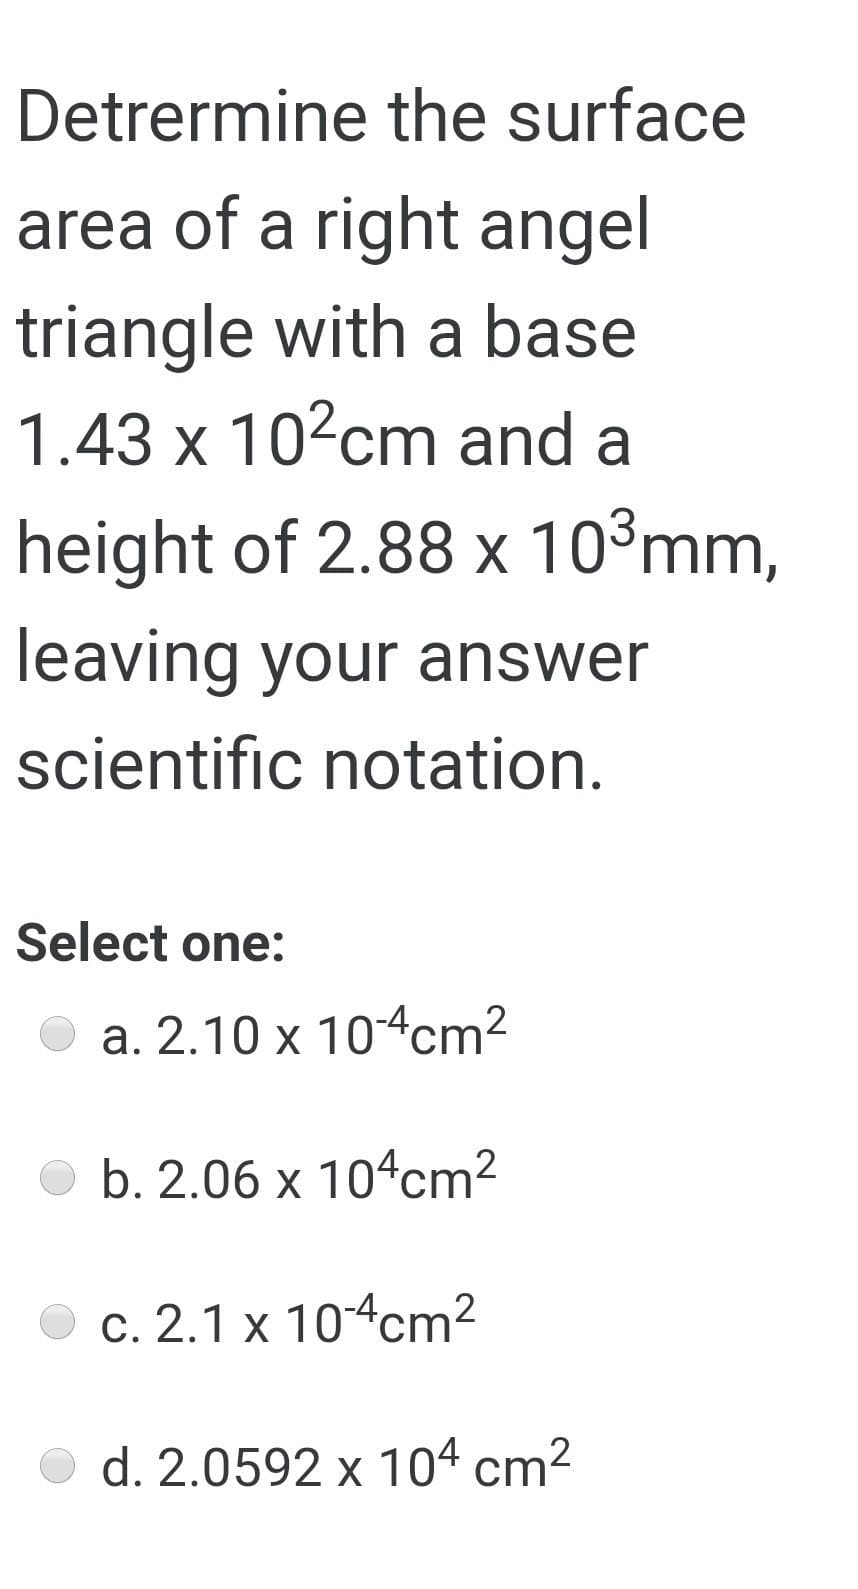 Detrermine the surface
area of a right angel
triangle with a base
1.43 x 10?cm and a
height of 2.88 x 10°mm,
leaving your answer
scientific notation.
Select one:
a. 2.10 x 104cm2
b. 2.06 x 104cm²
c. 2.1 x 104cm²
d. 2.0592 x 104 cm2
